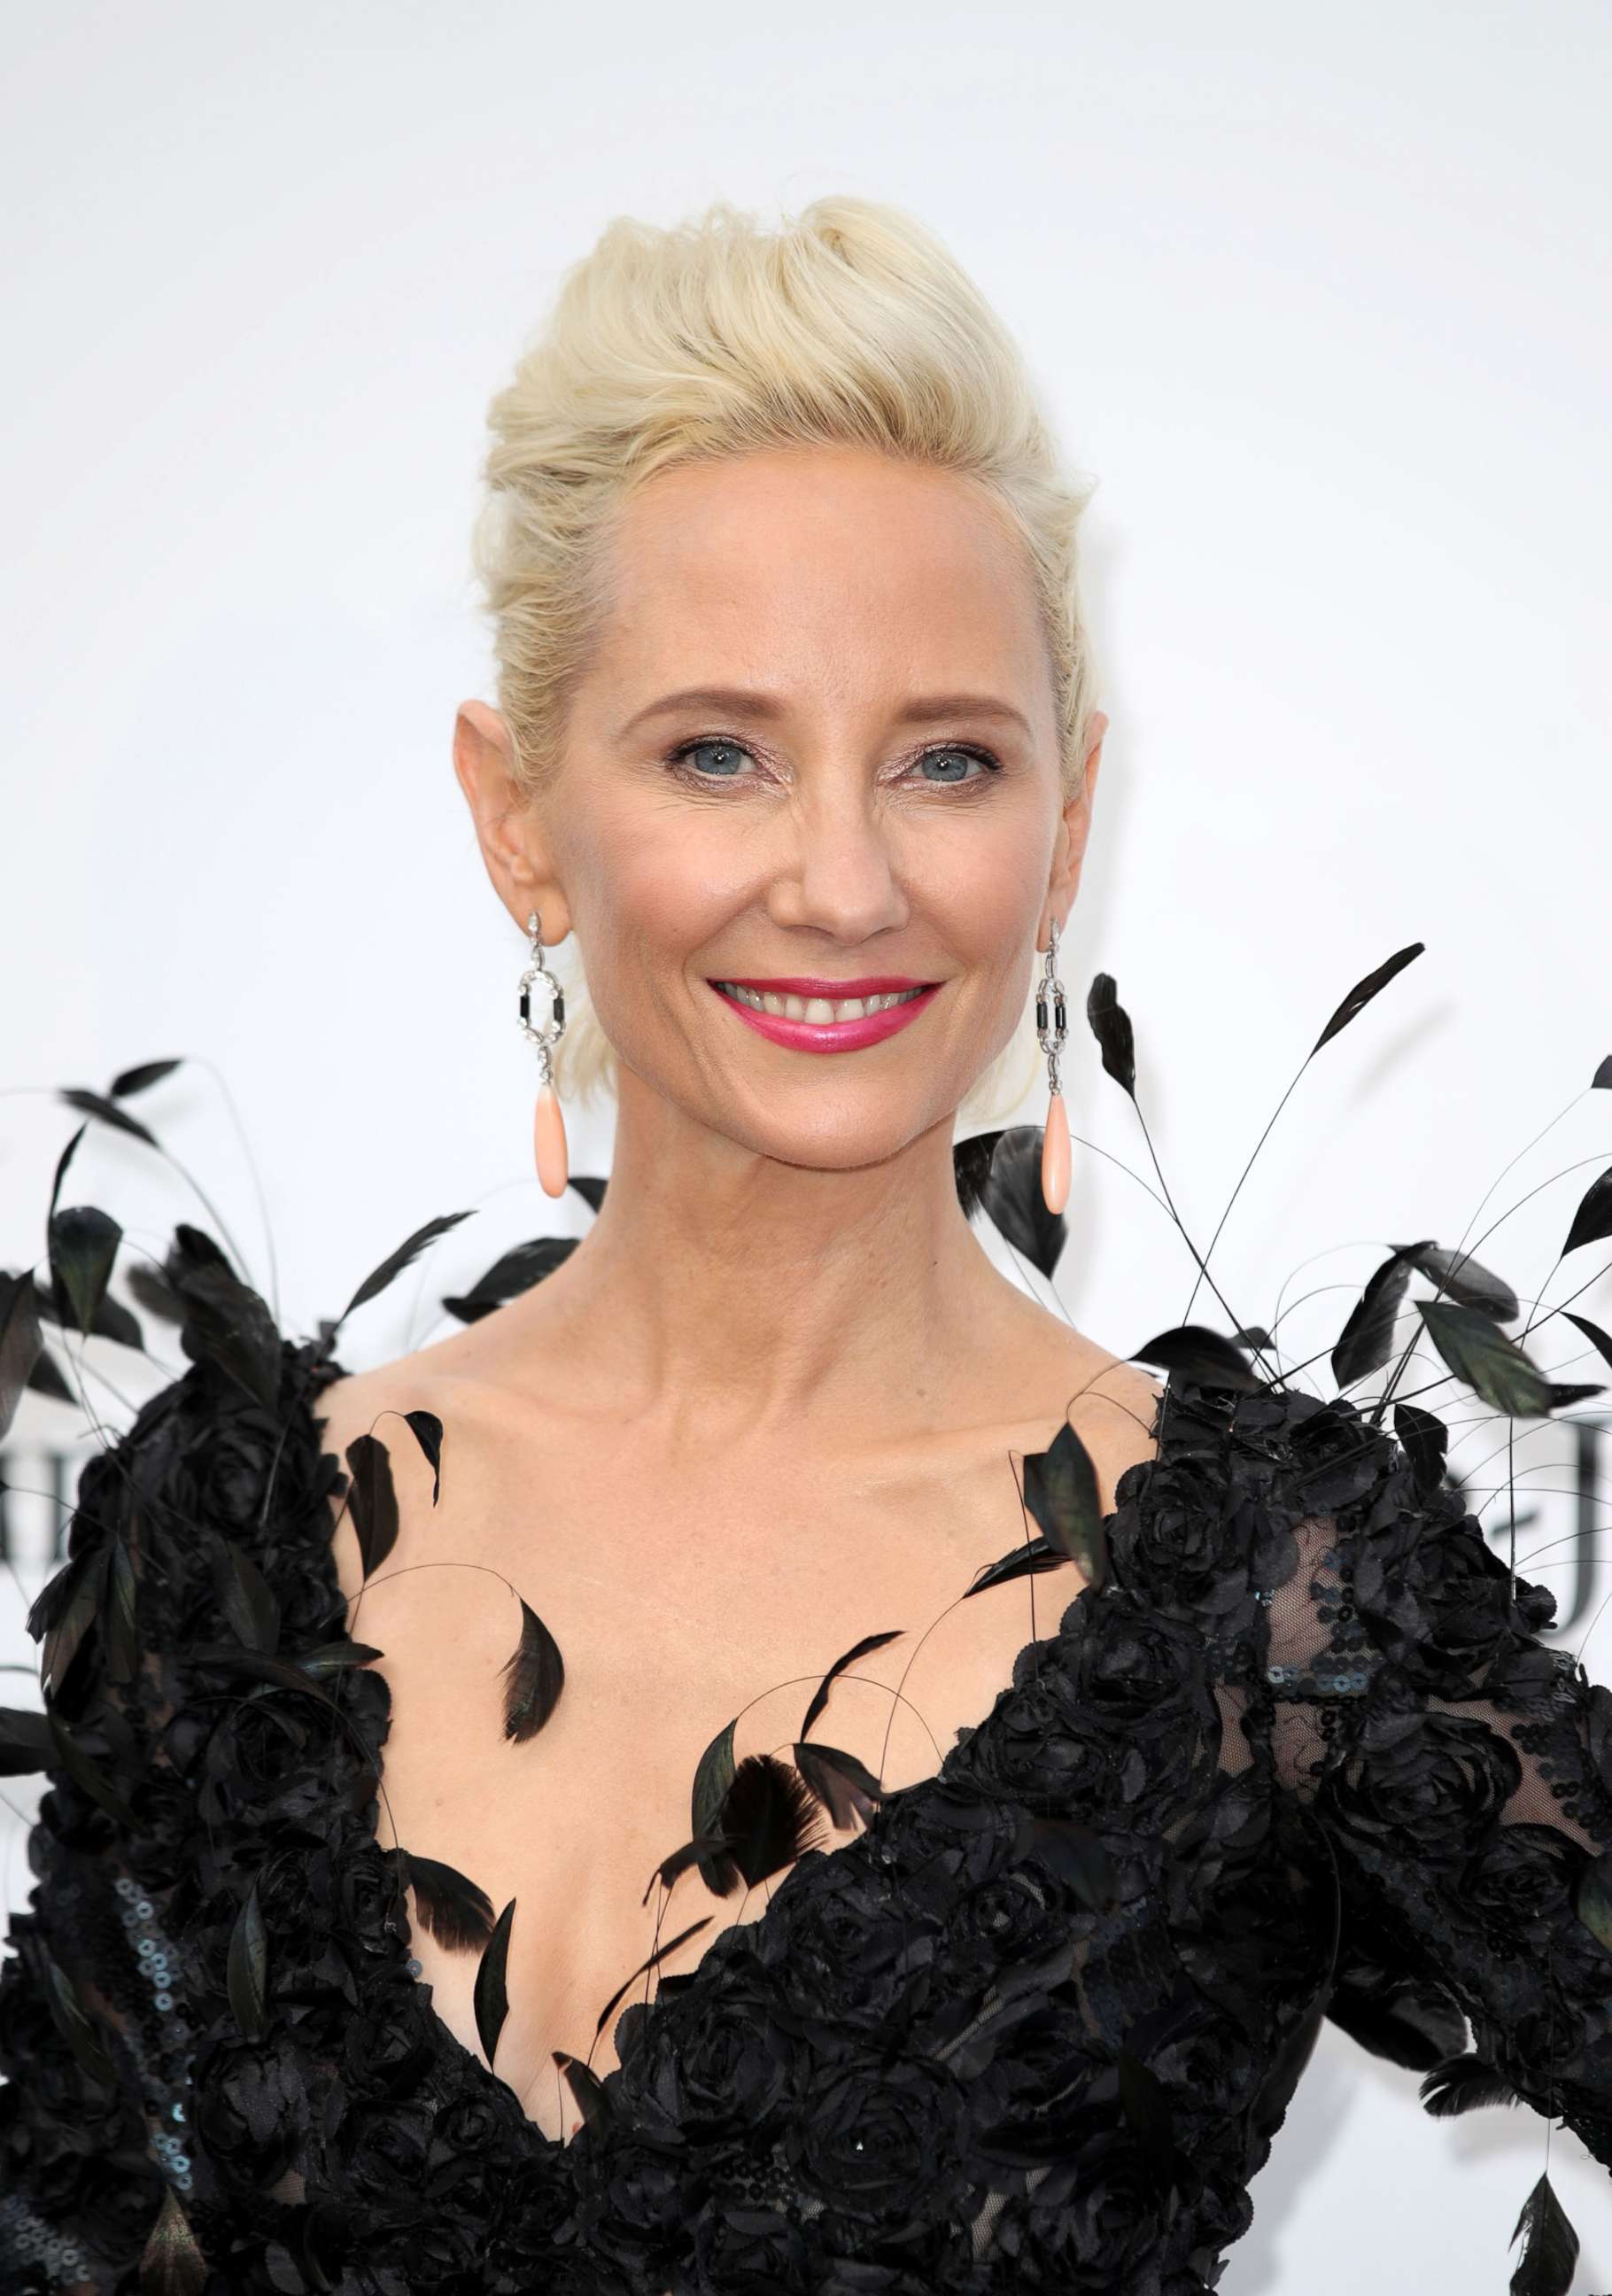 PHOTO: Anne Heche arrives at the amfAR Gala Cannes 2018 at Hotel du Cap-Eden-Roc on May 17, 2018 in Cap d'Antibes, France.